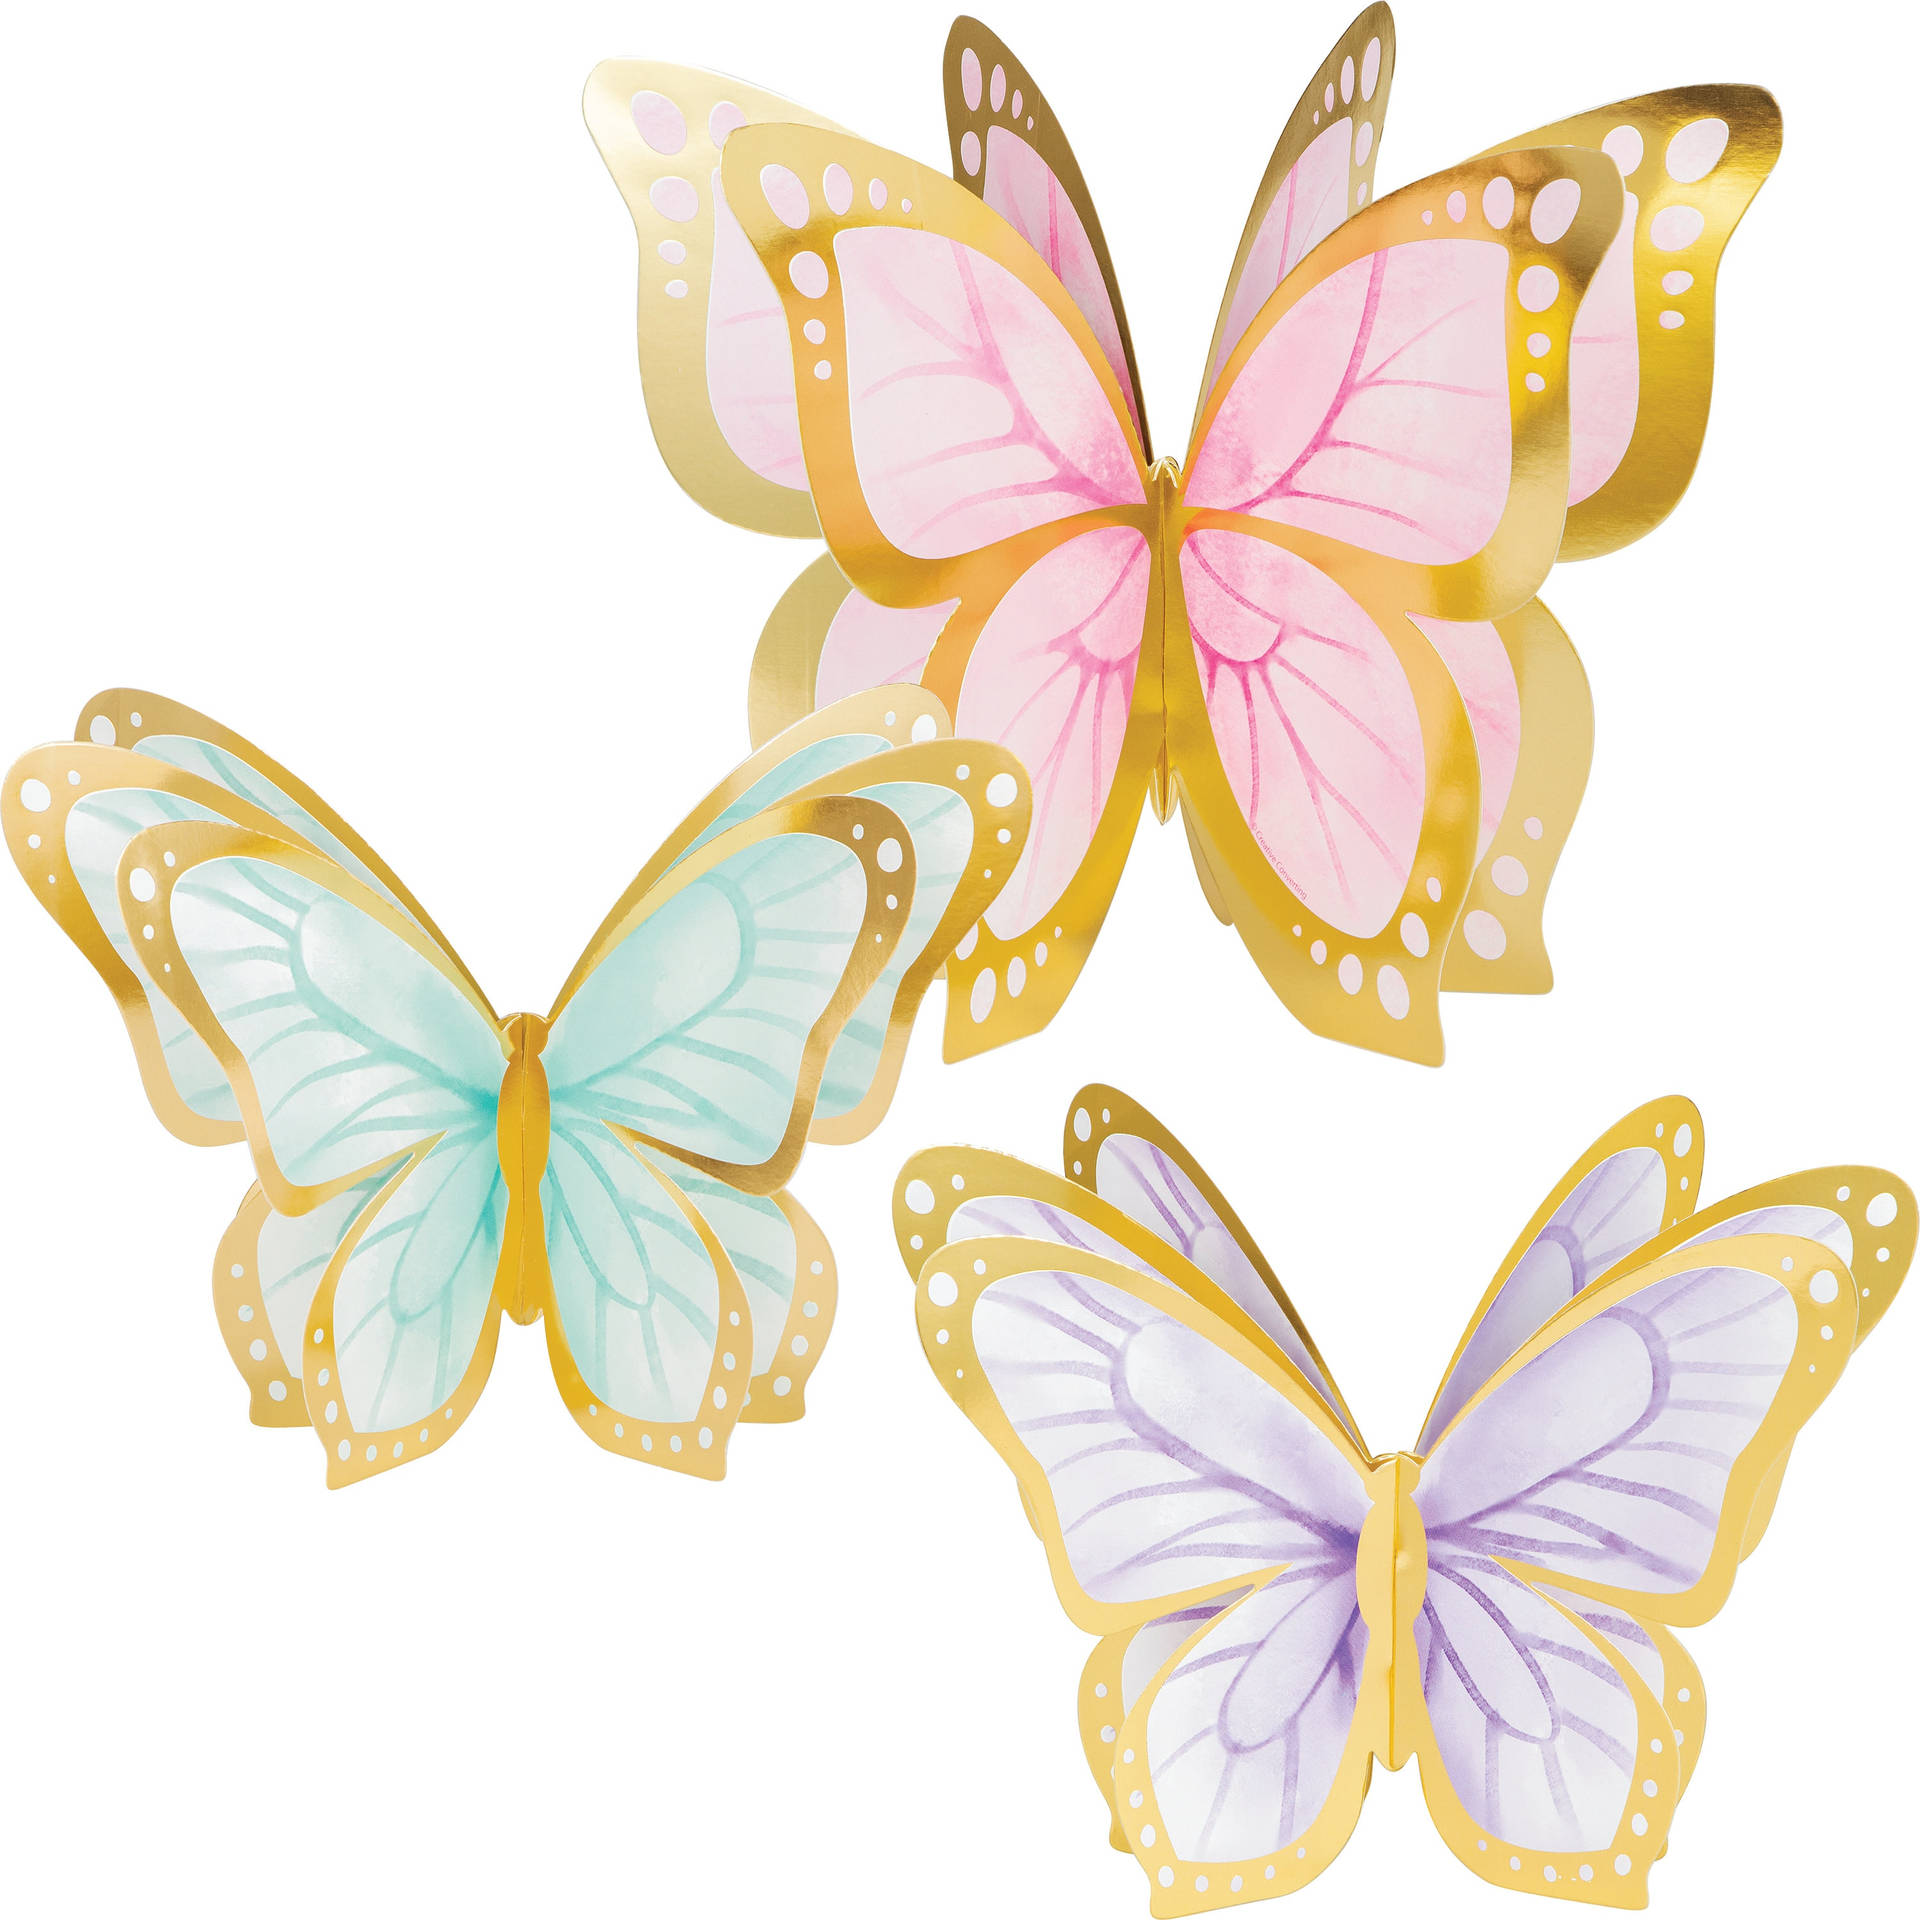 Softly Perched - An Alluring Pastel Butterfly Wallpaper